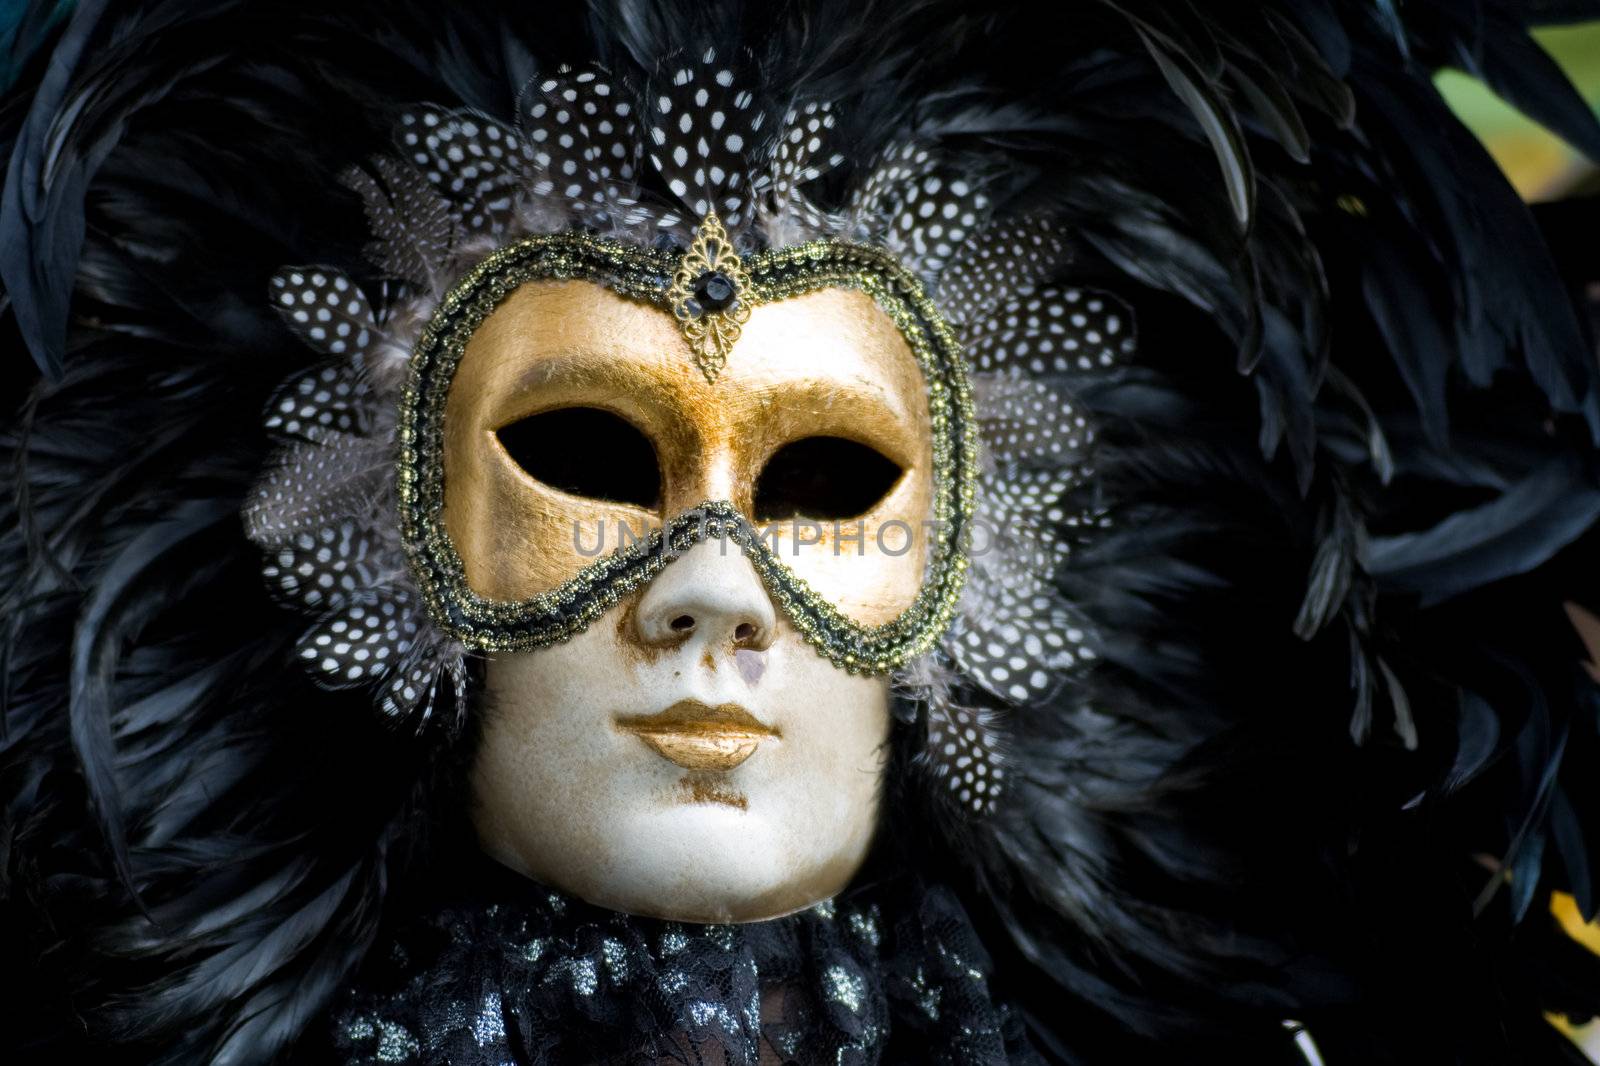 Carnival in venice with model dressed in various costumes and masks - black man